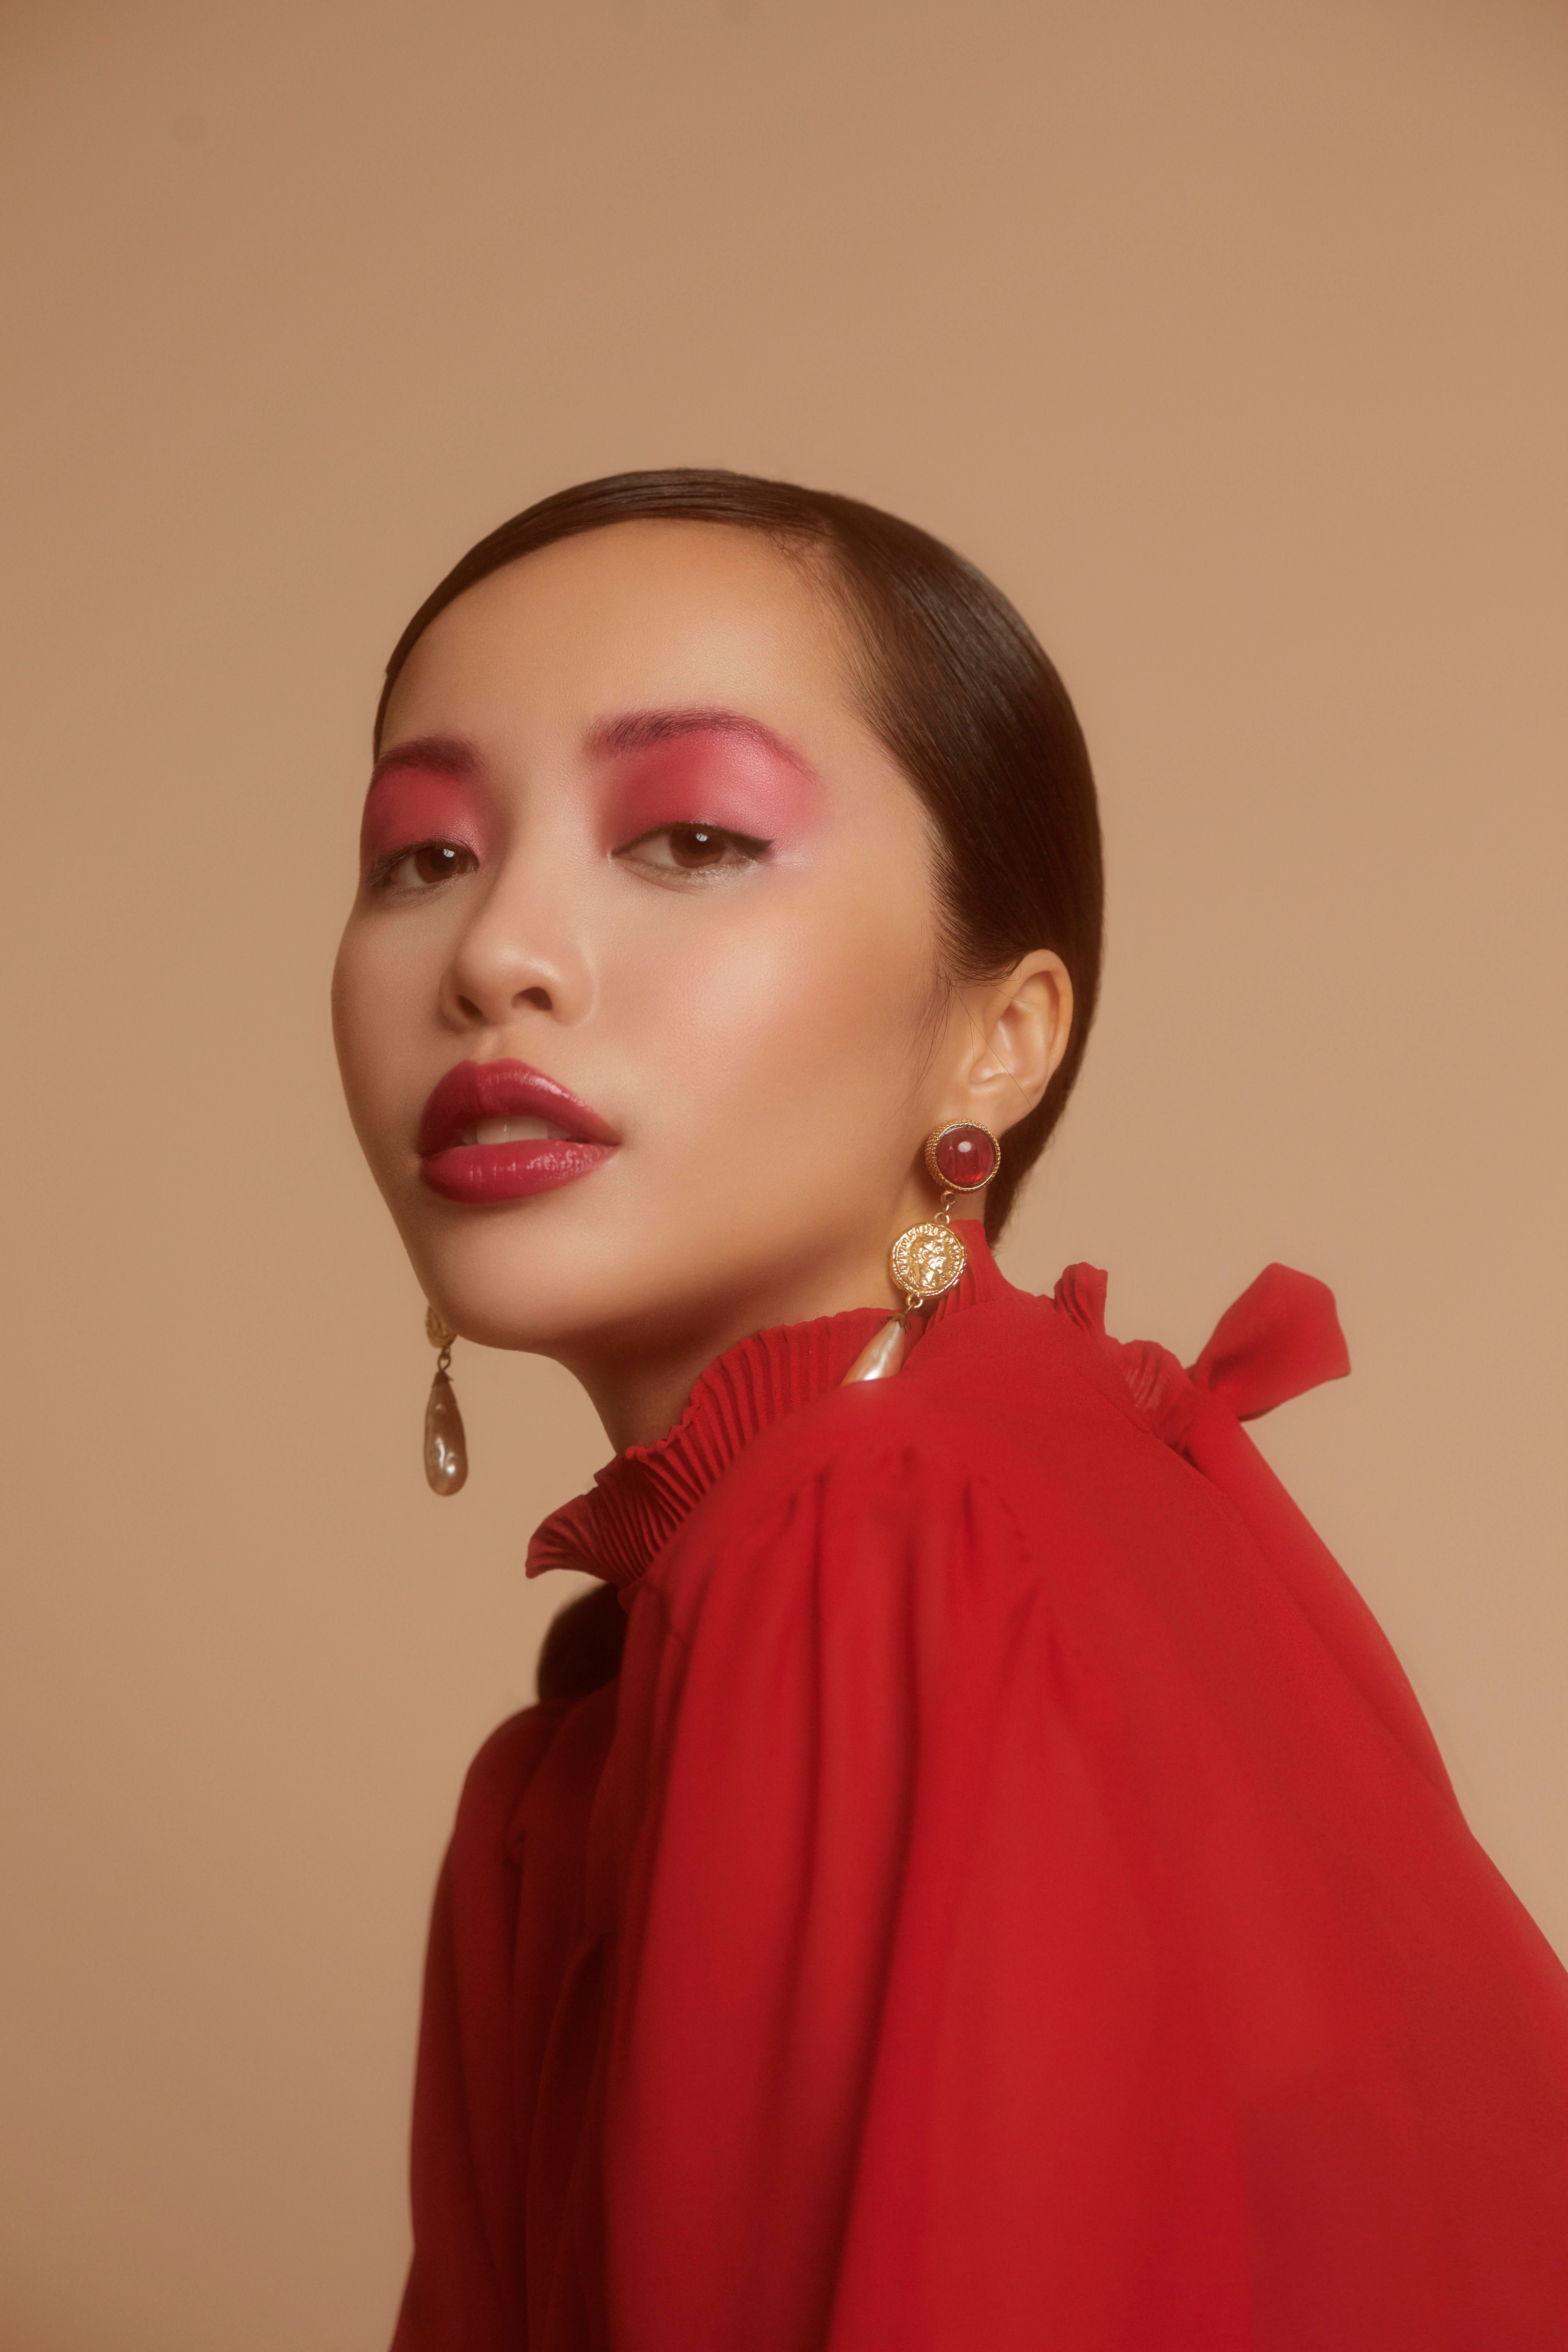 Michelle Phan, YouTube Beauty Star, On Why She Left